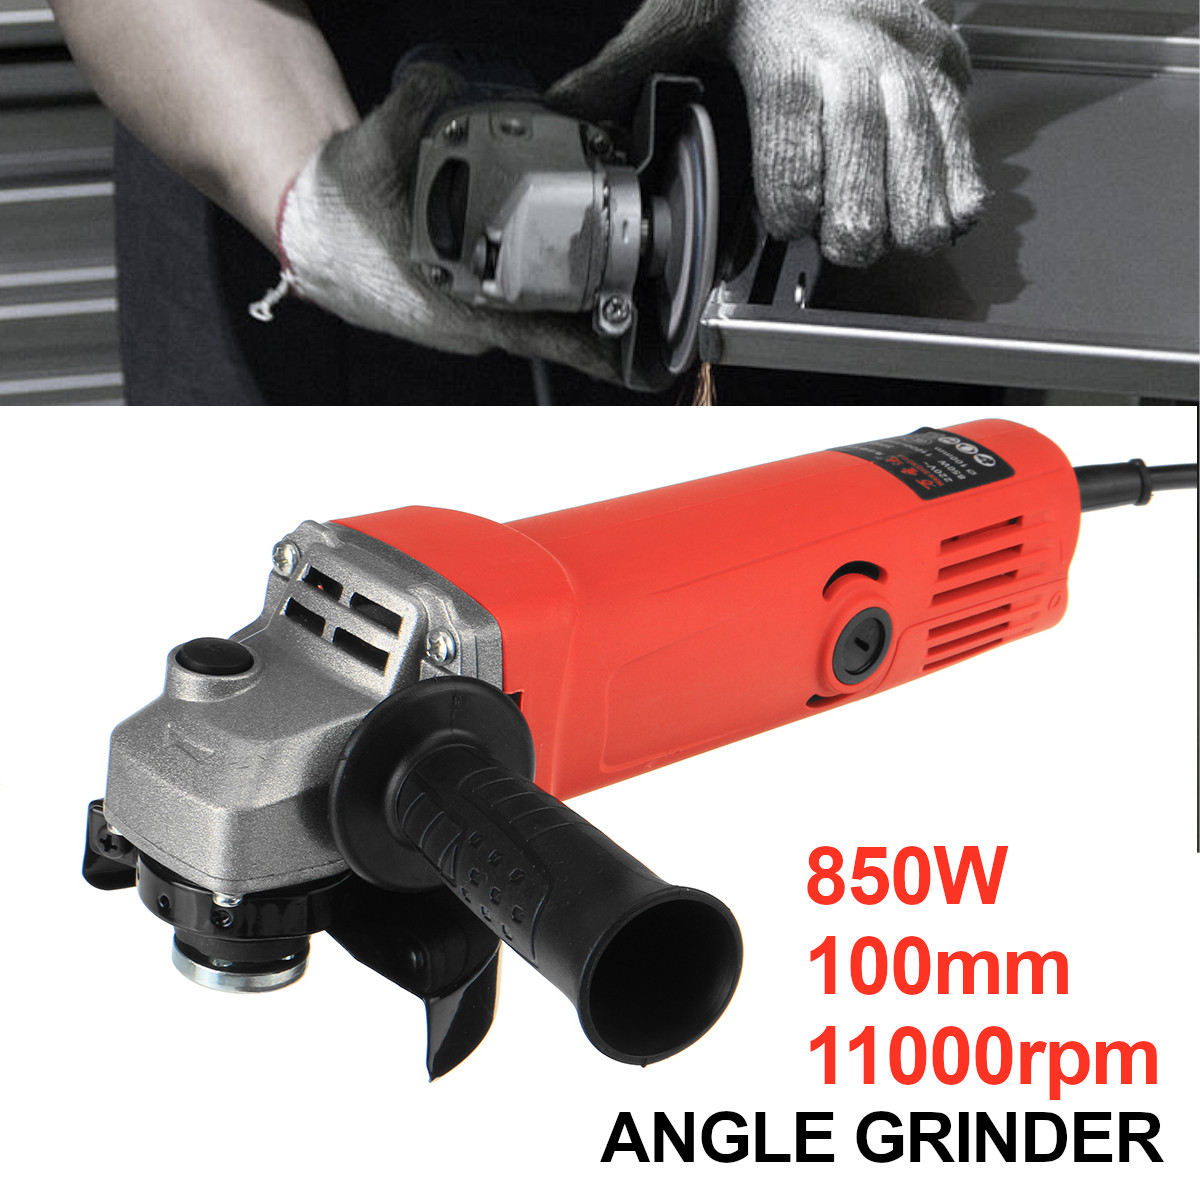 850W-100mm-11000rpm-Electric-Angle-Grinder-Cutting-Machine-Handheld-Polishing-Grinding-Carving-Tool-1736781-2